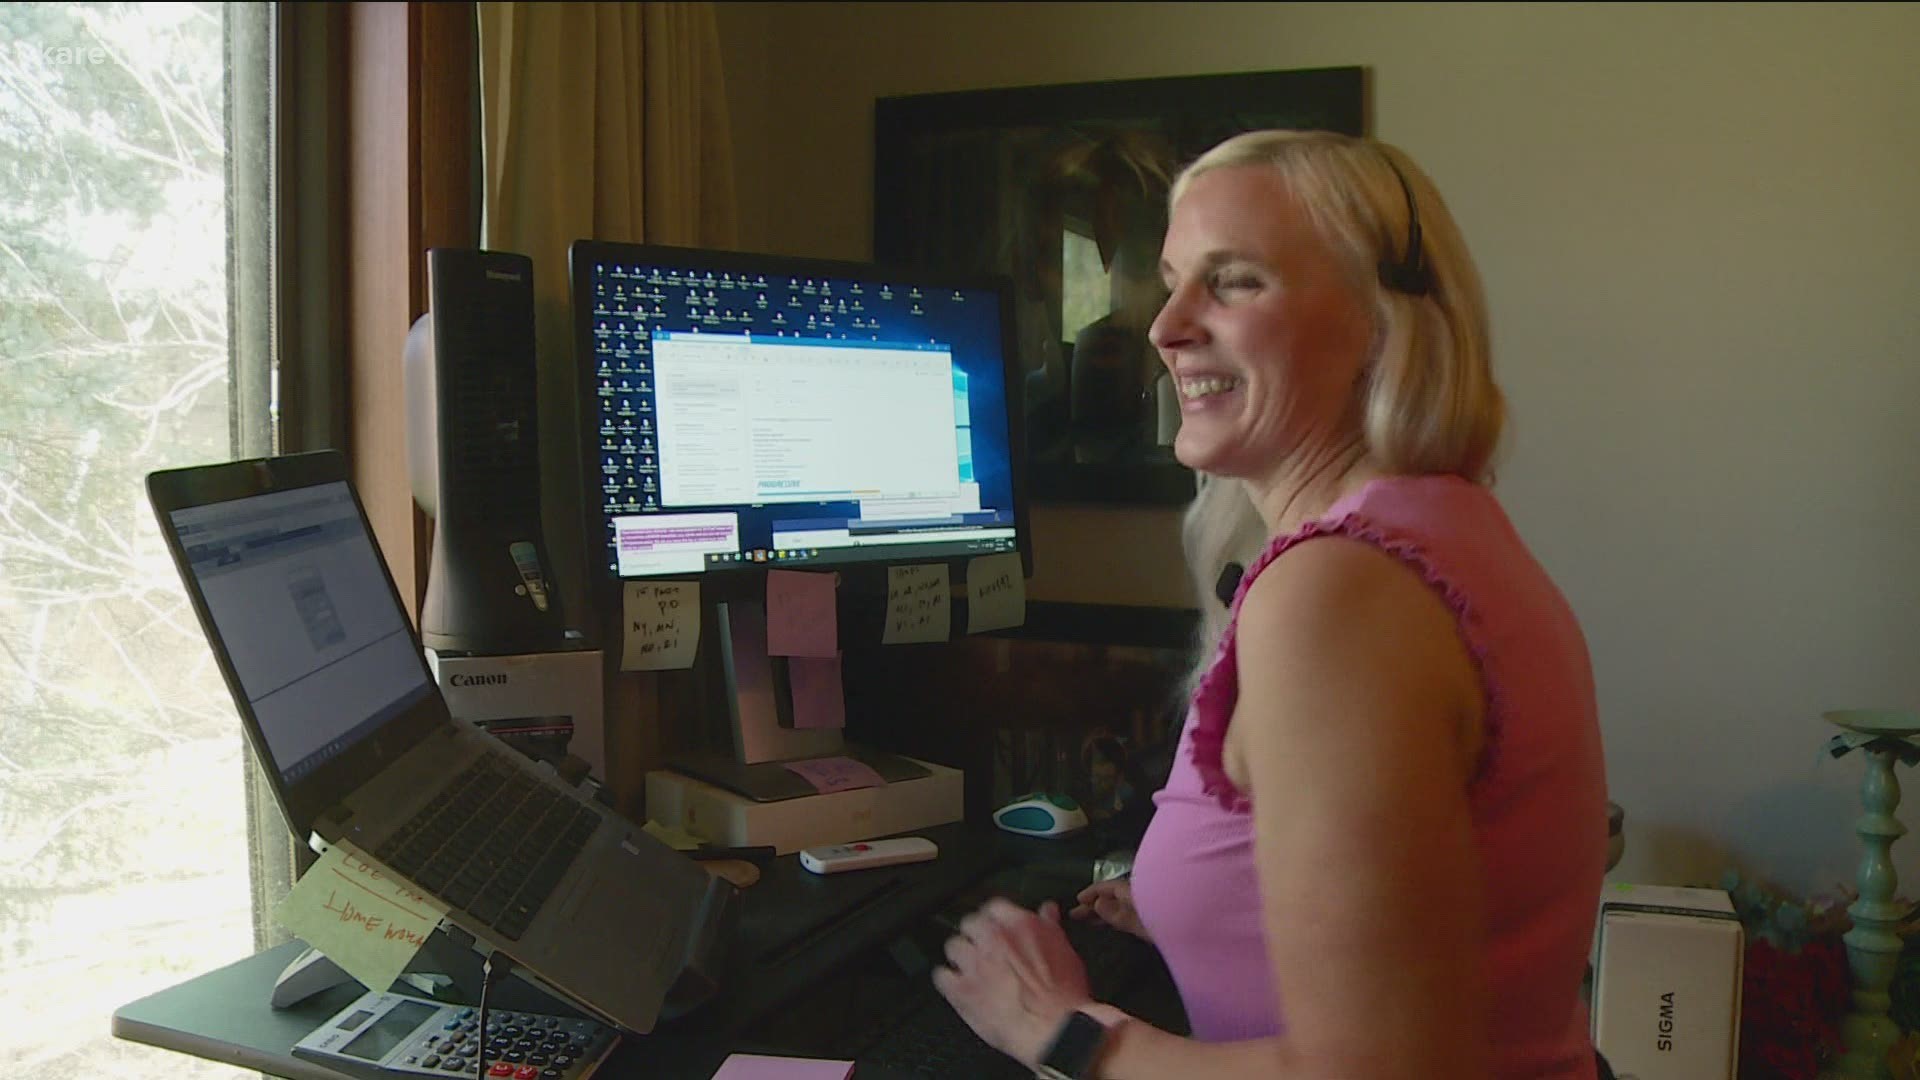 Lisa Erickson averages between 17 and 20 miles a day without leaving her desk.